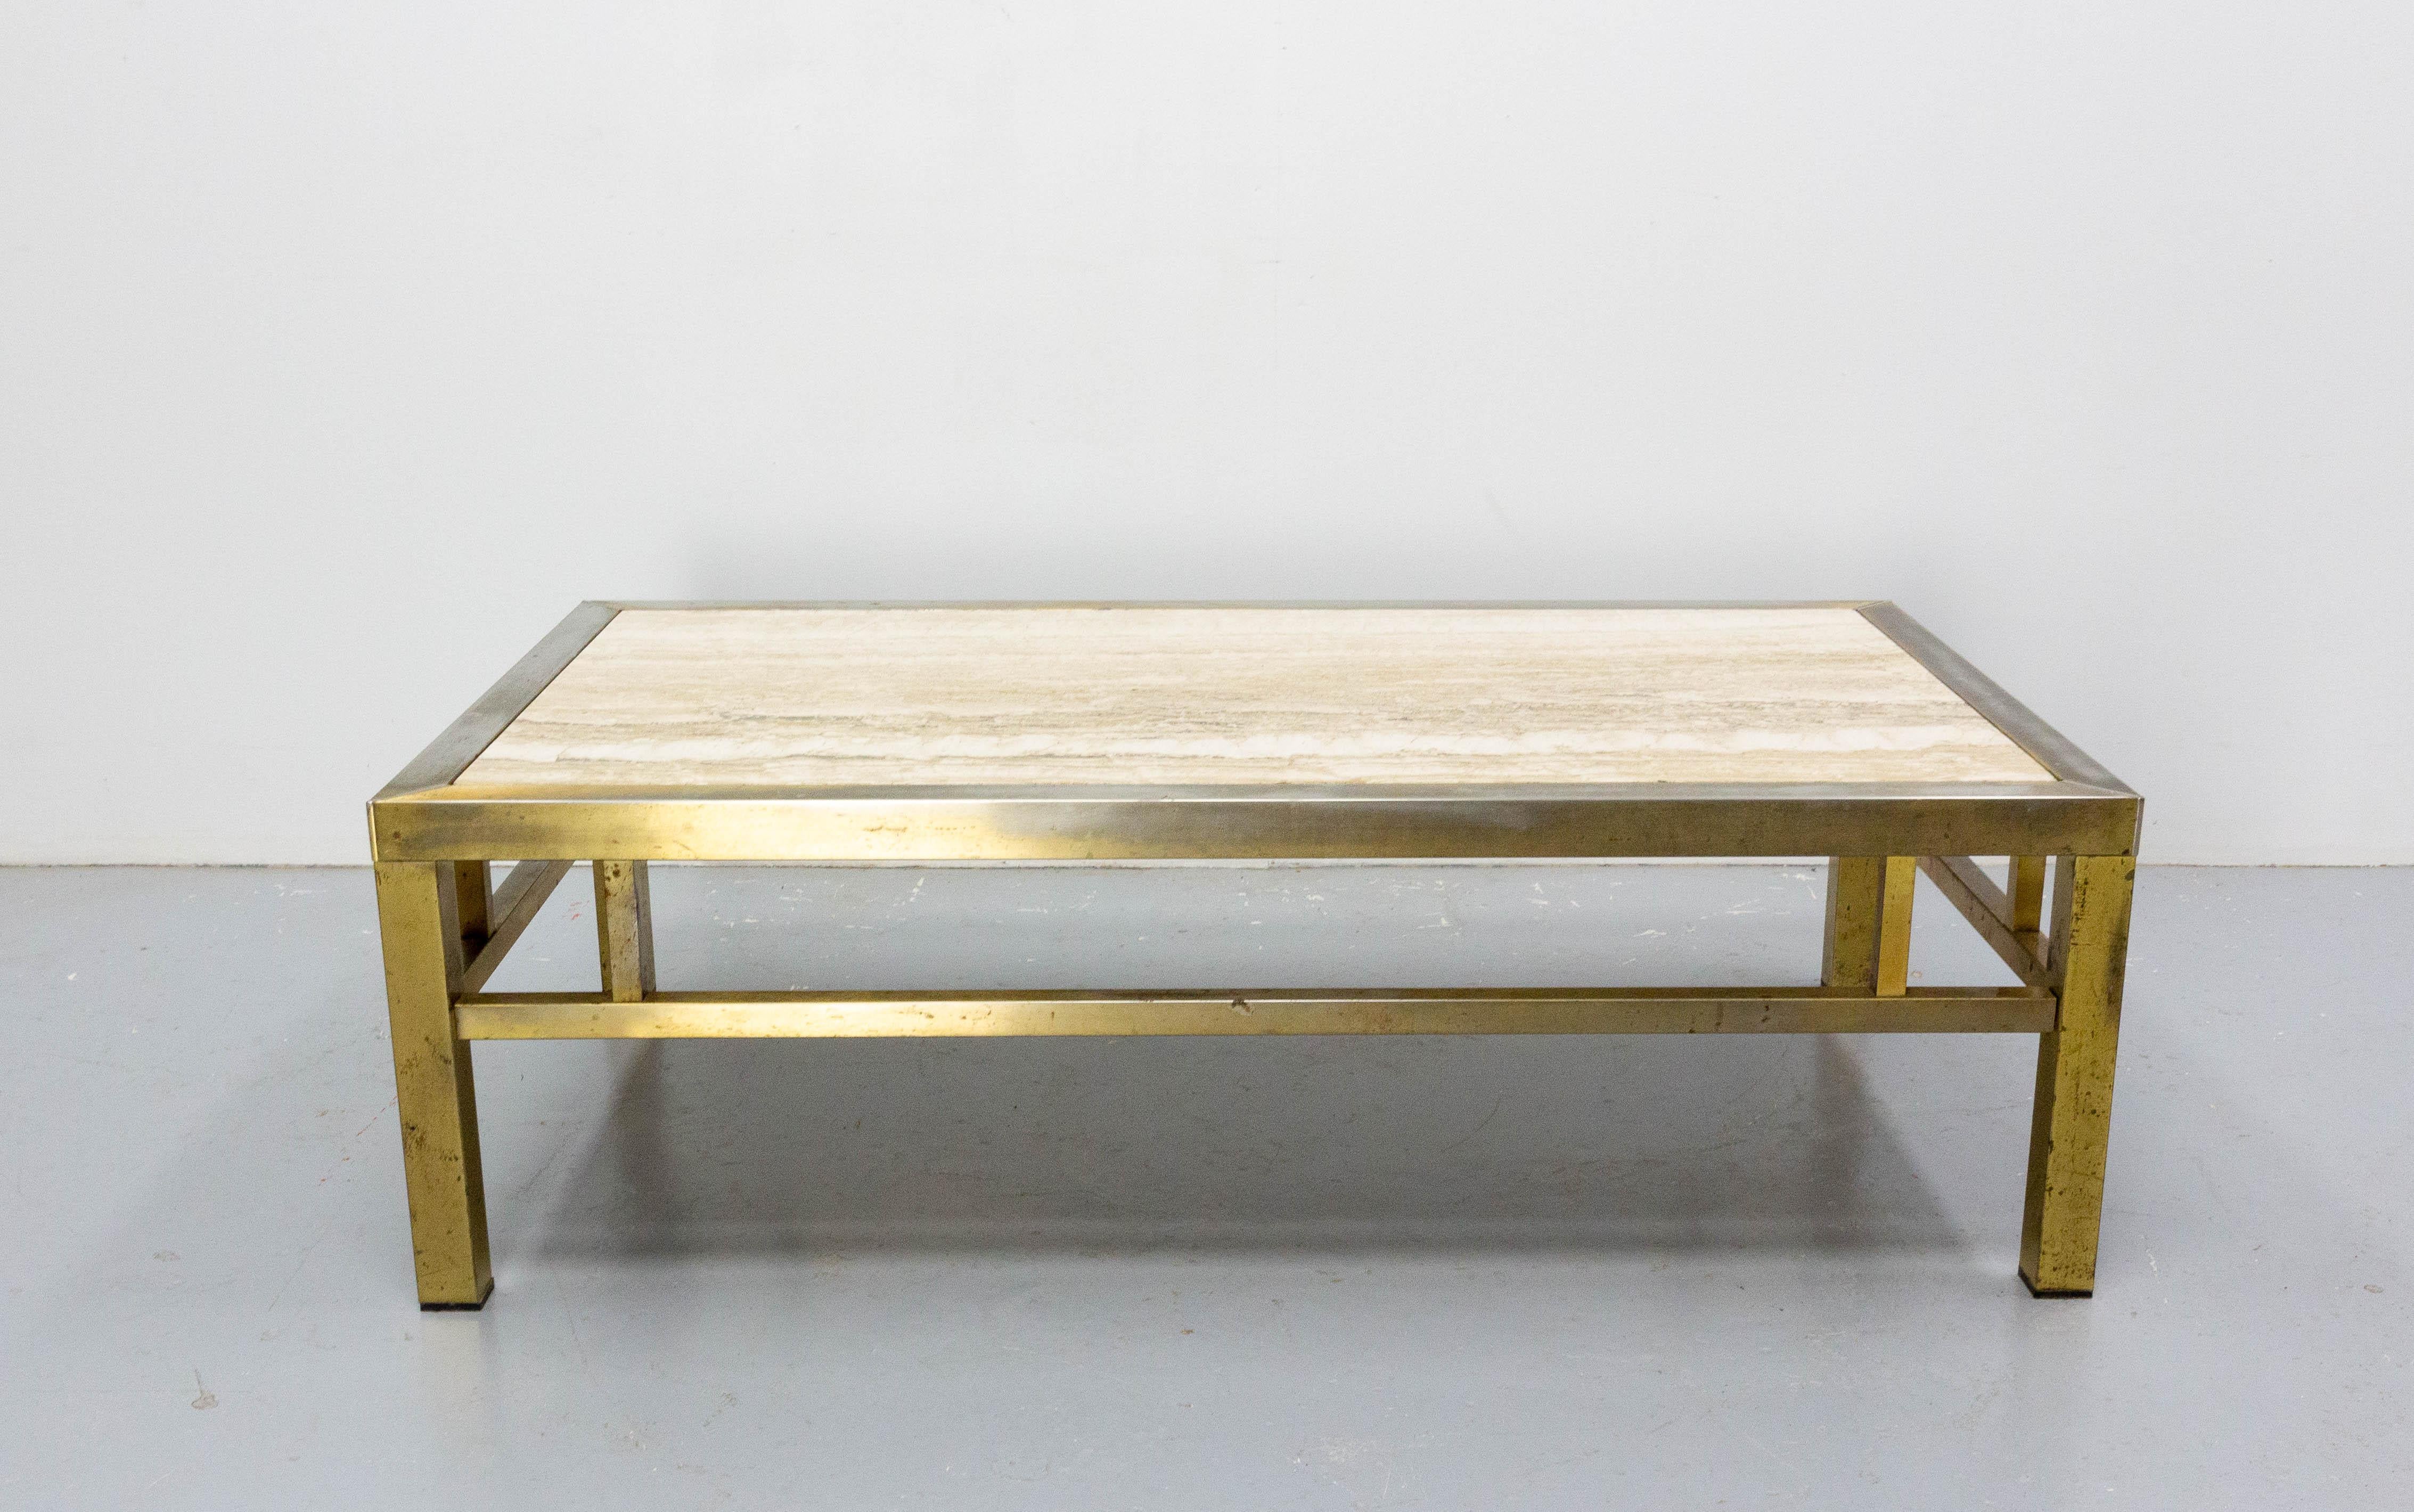 Coffee table in the Guy Lefèvre style, simple and clean
Travertine and gilt brass 
Good vintage condition.

